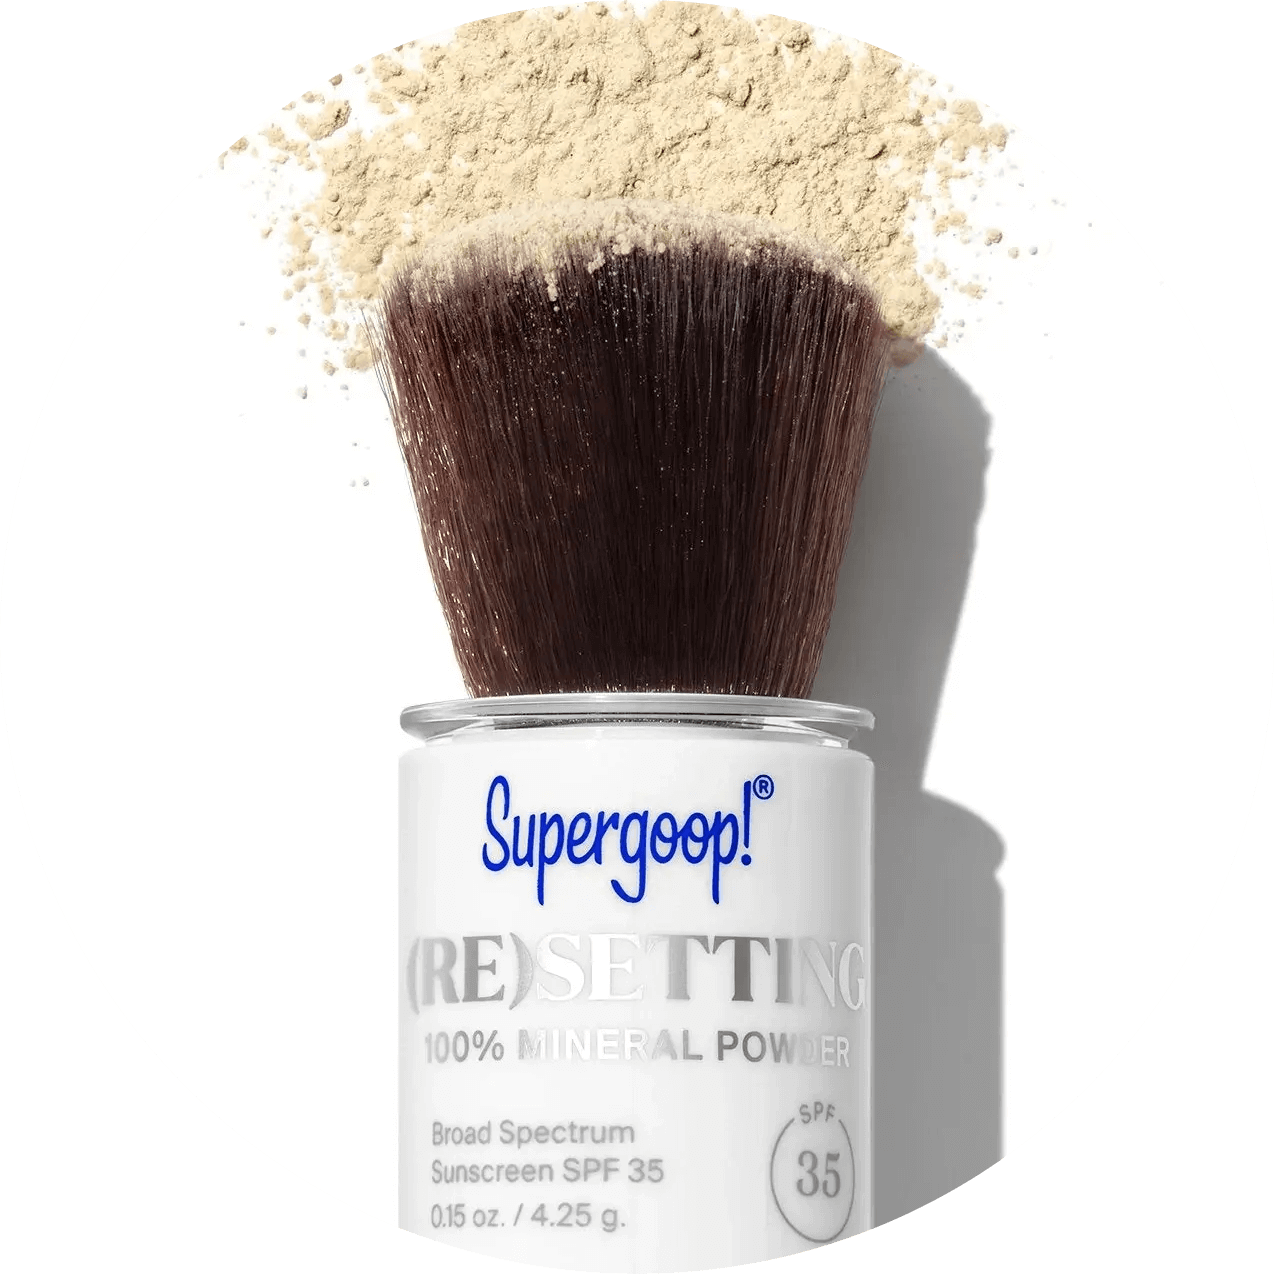 (Re)setting 100% Mineral Powder SPF 35 NudeFace Chile